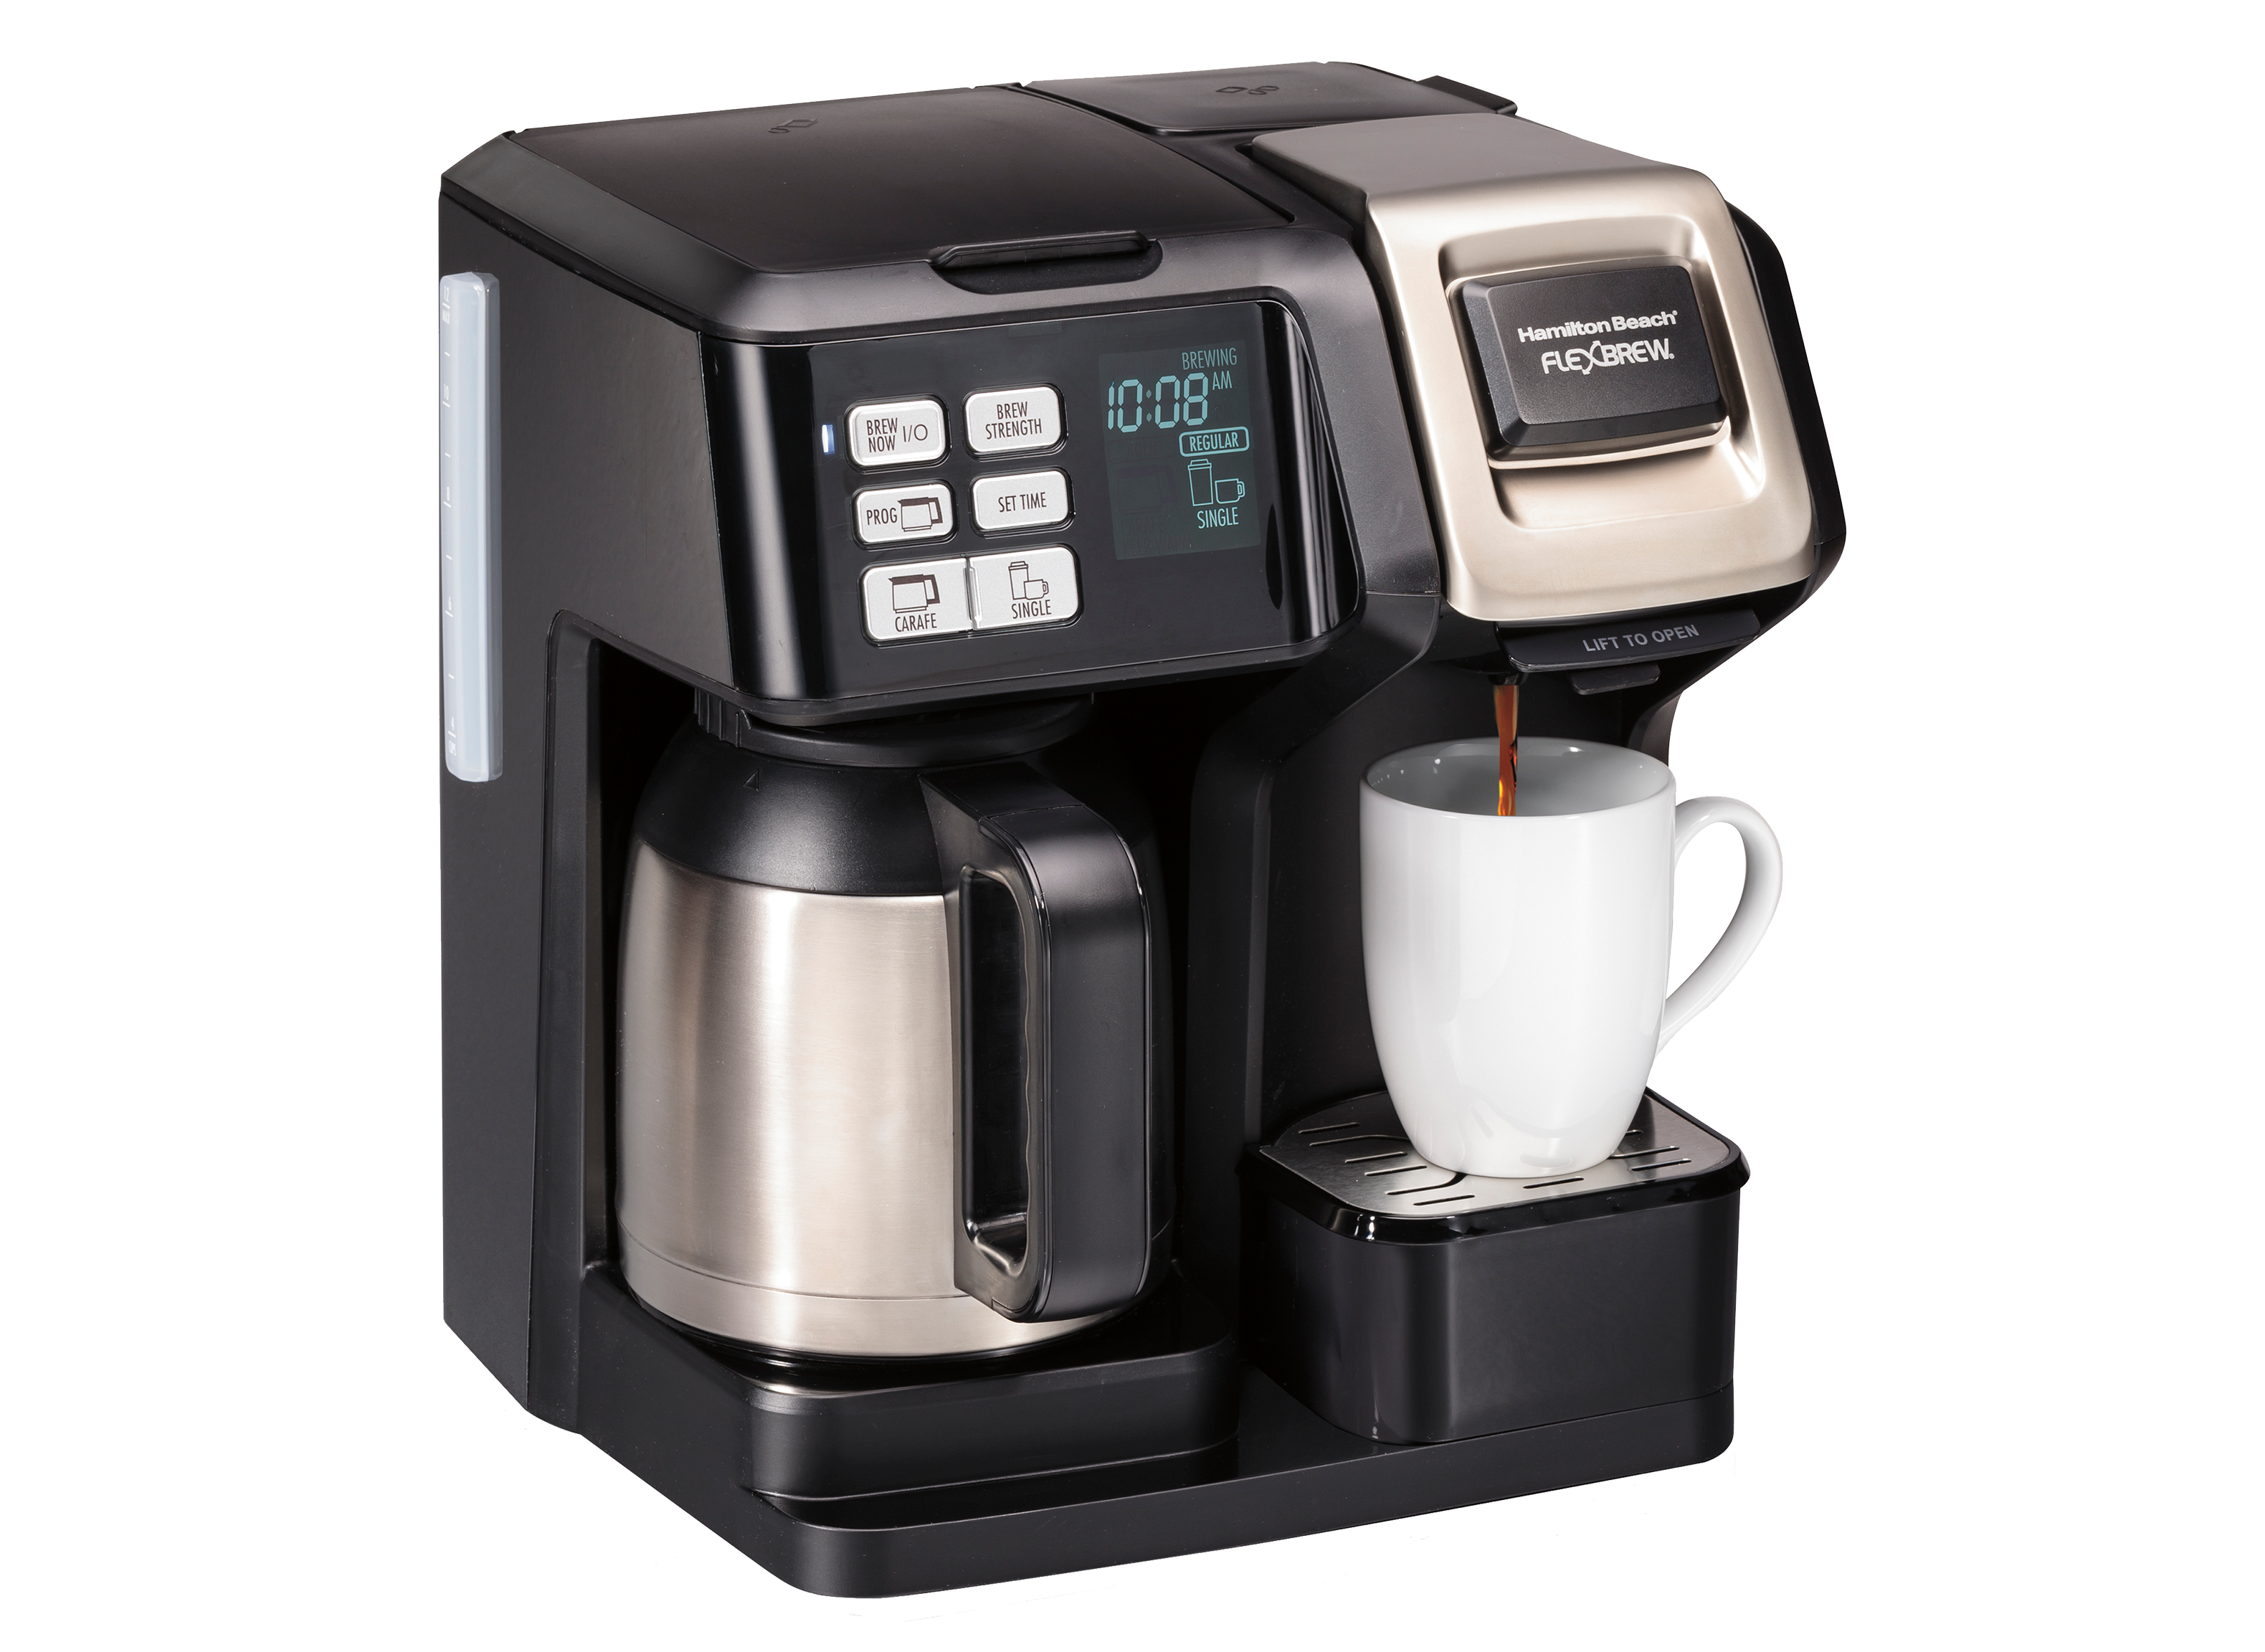 https://crdms.images.consumerreports.org/prod/products/cr/models/398200-drip-coffee-makers-hamilton-beach-flexbrew-2-way-49966-10005094.png